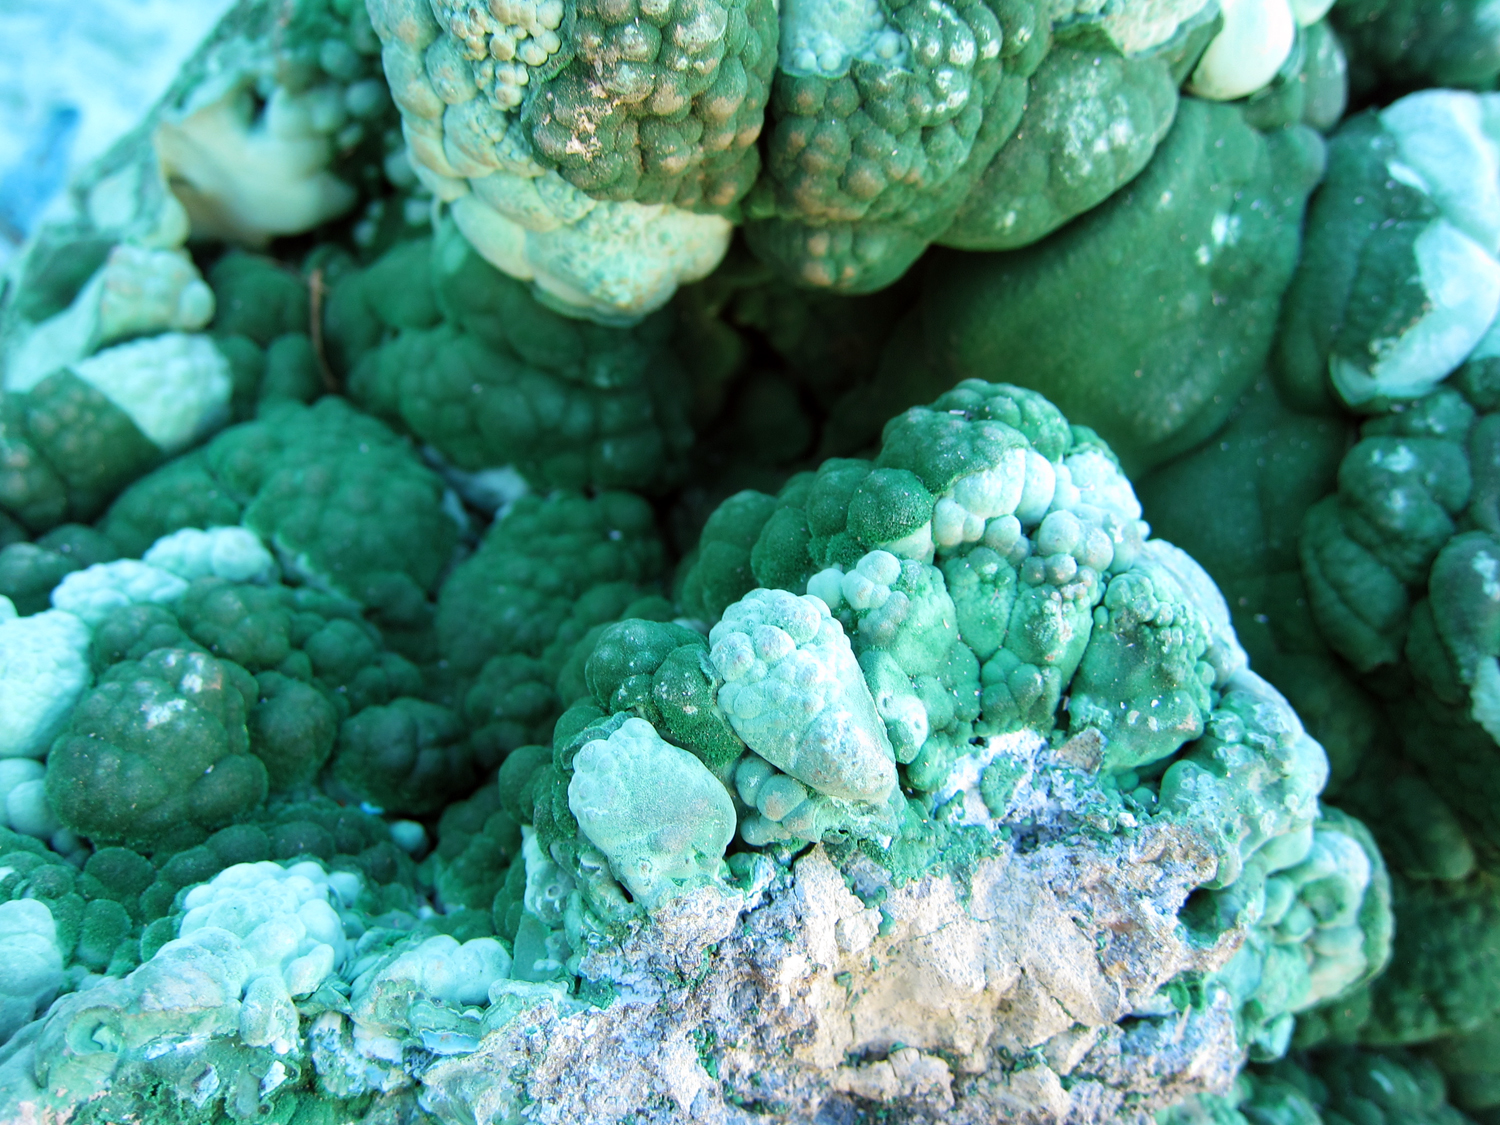  ​I was loving this bubbling green specimen. 